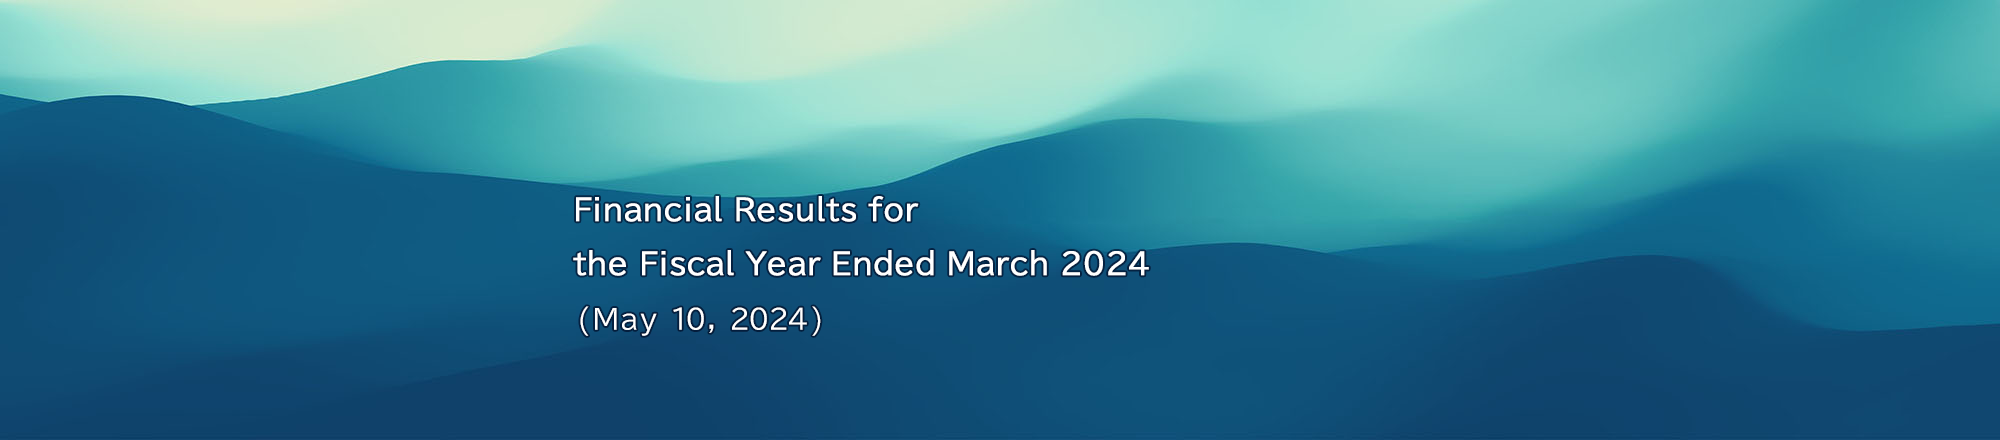 Financial Results for the Fiscal Year Ended March 2024 (May 10, 2024)